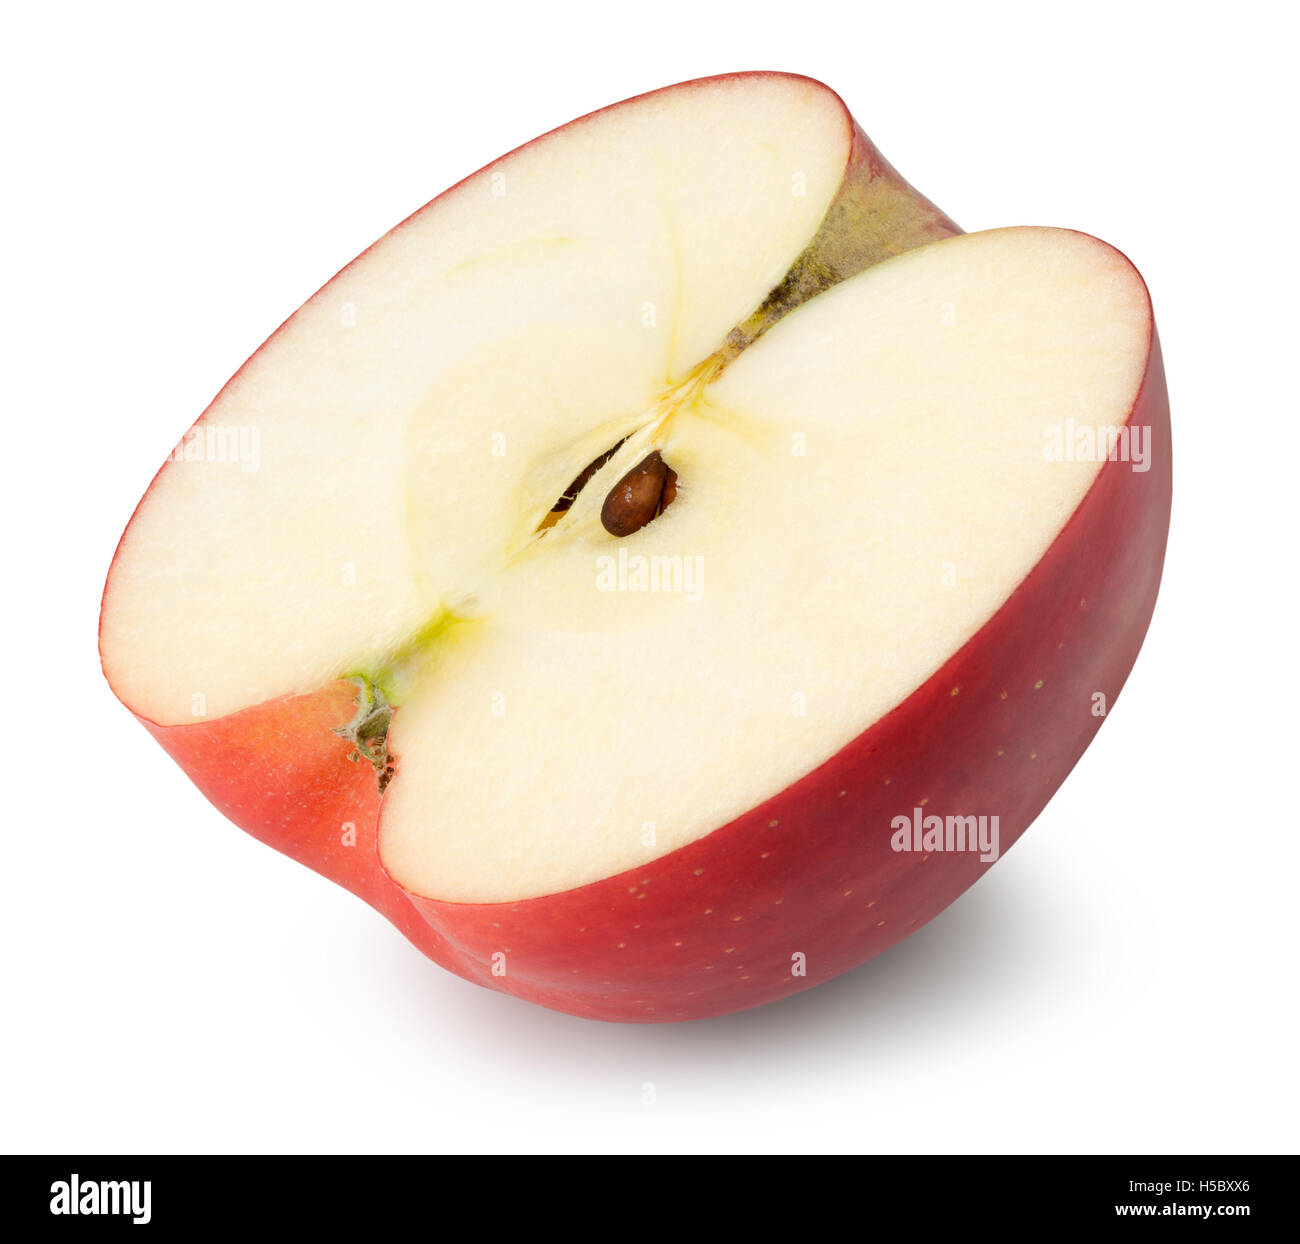 half of red apple isolated on the white background. Stock Photo